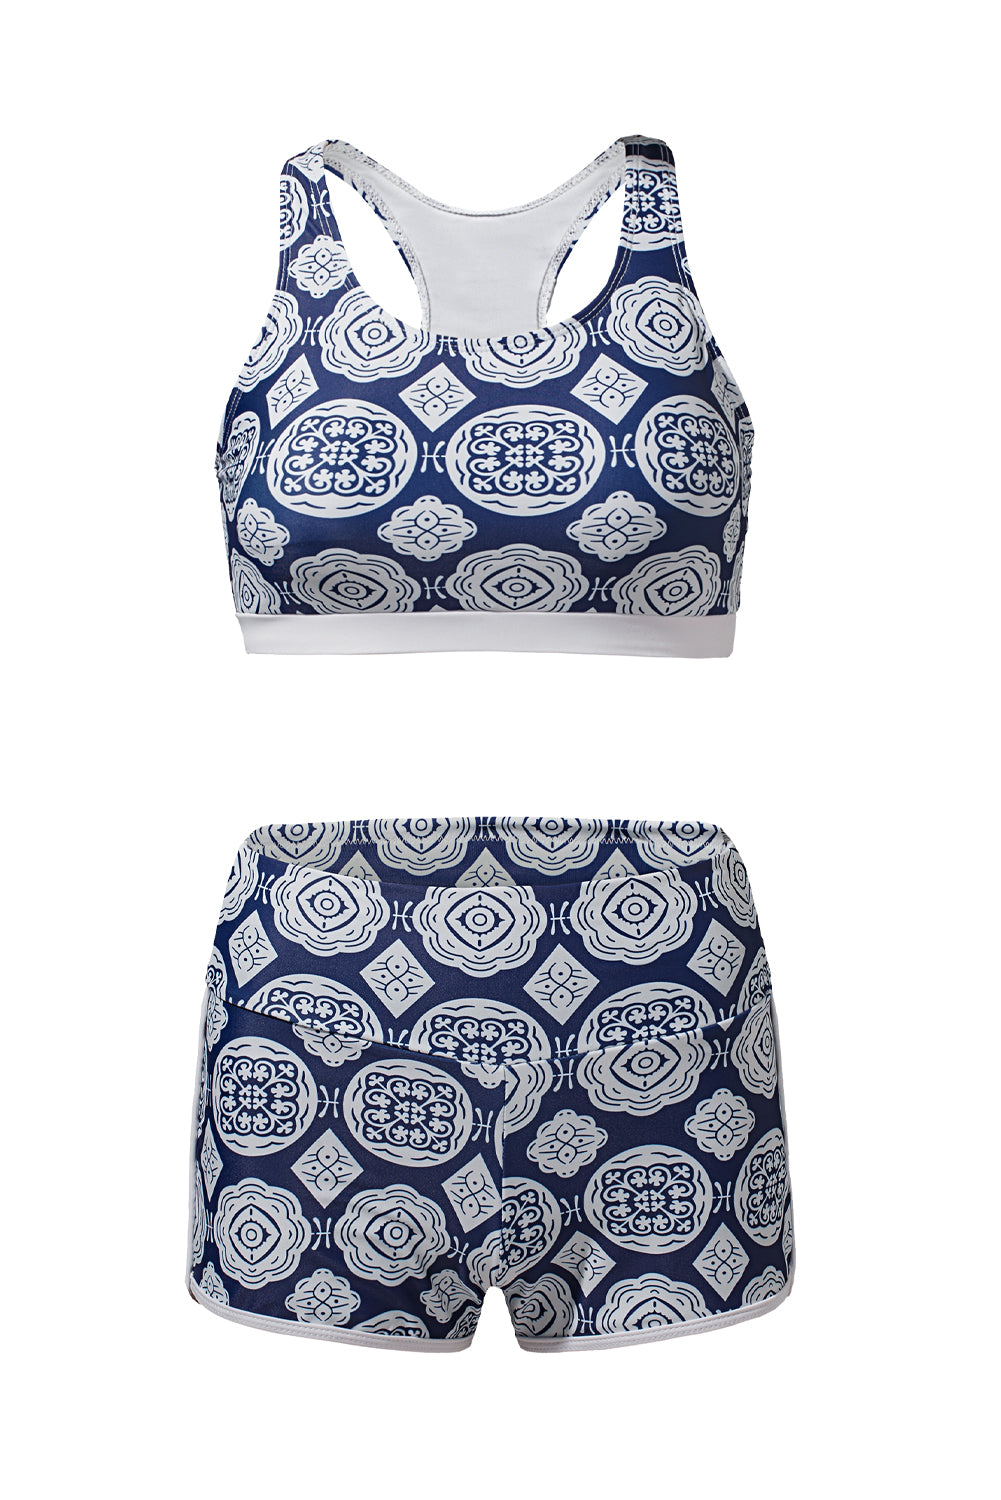 LC415772-5-S, LC415772-5-M, LC415772-5-L, LC415772-5-XL, LC415772-5-2XL, Blue 3 Piece Swimsuits for Women Printed Sporty Racerback Tankini Swimsuit